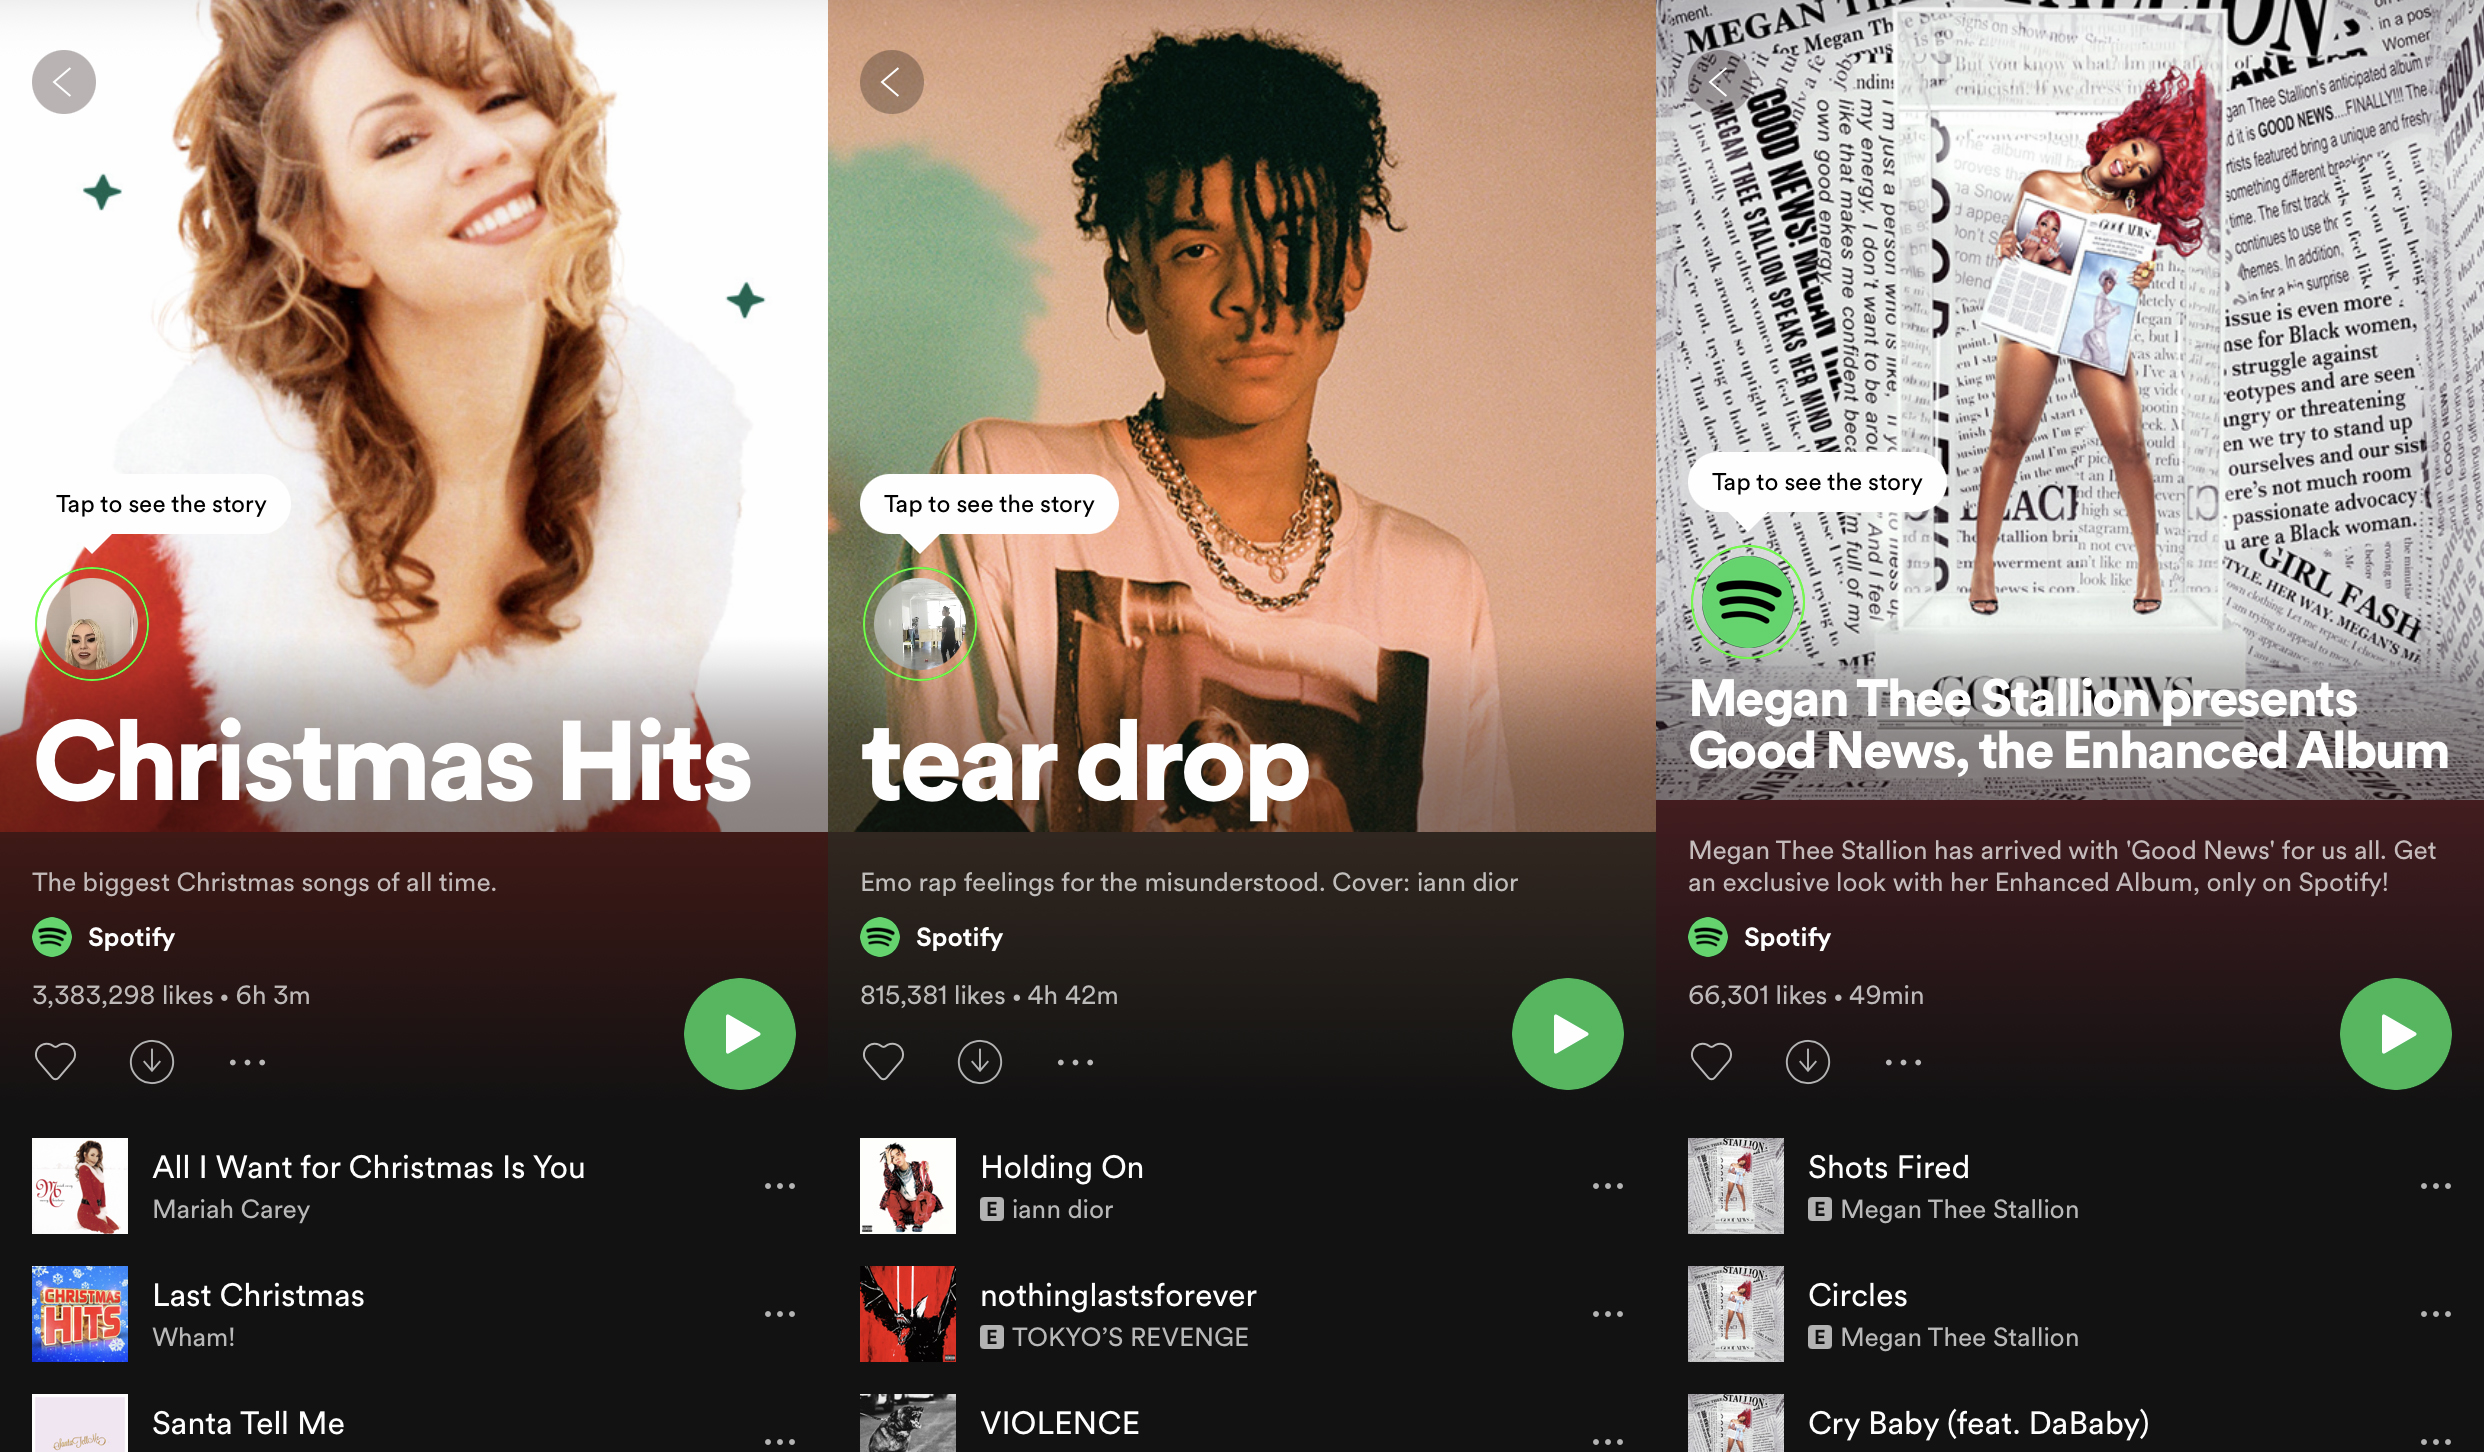 Why have Spotify introduced stories to their app?